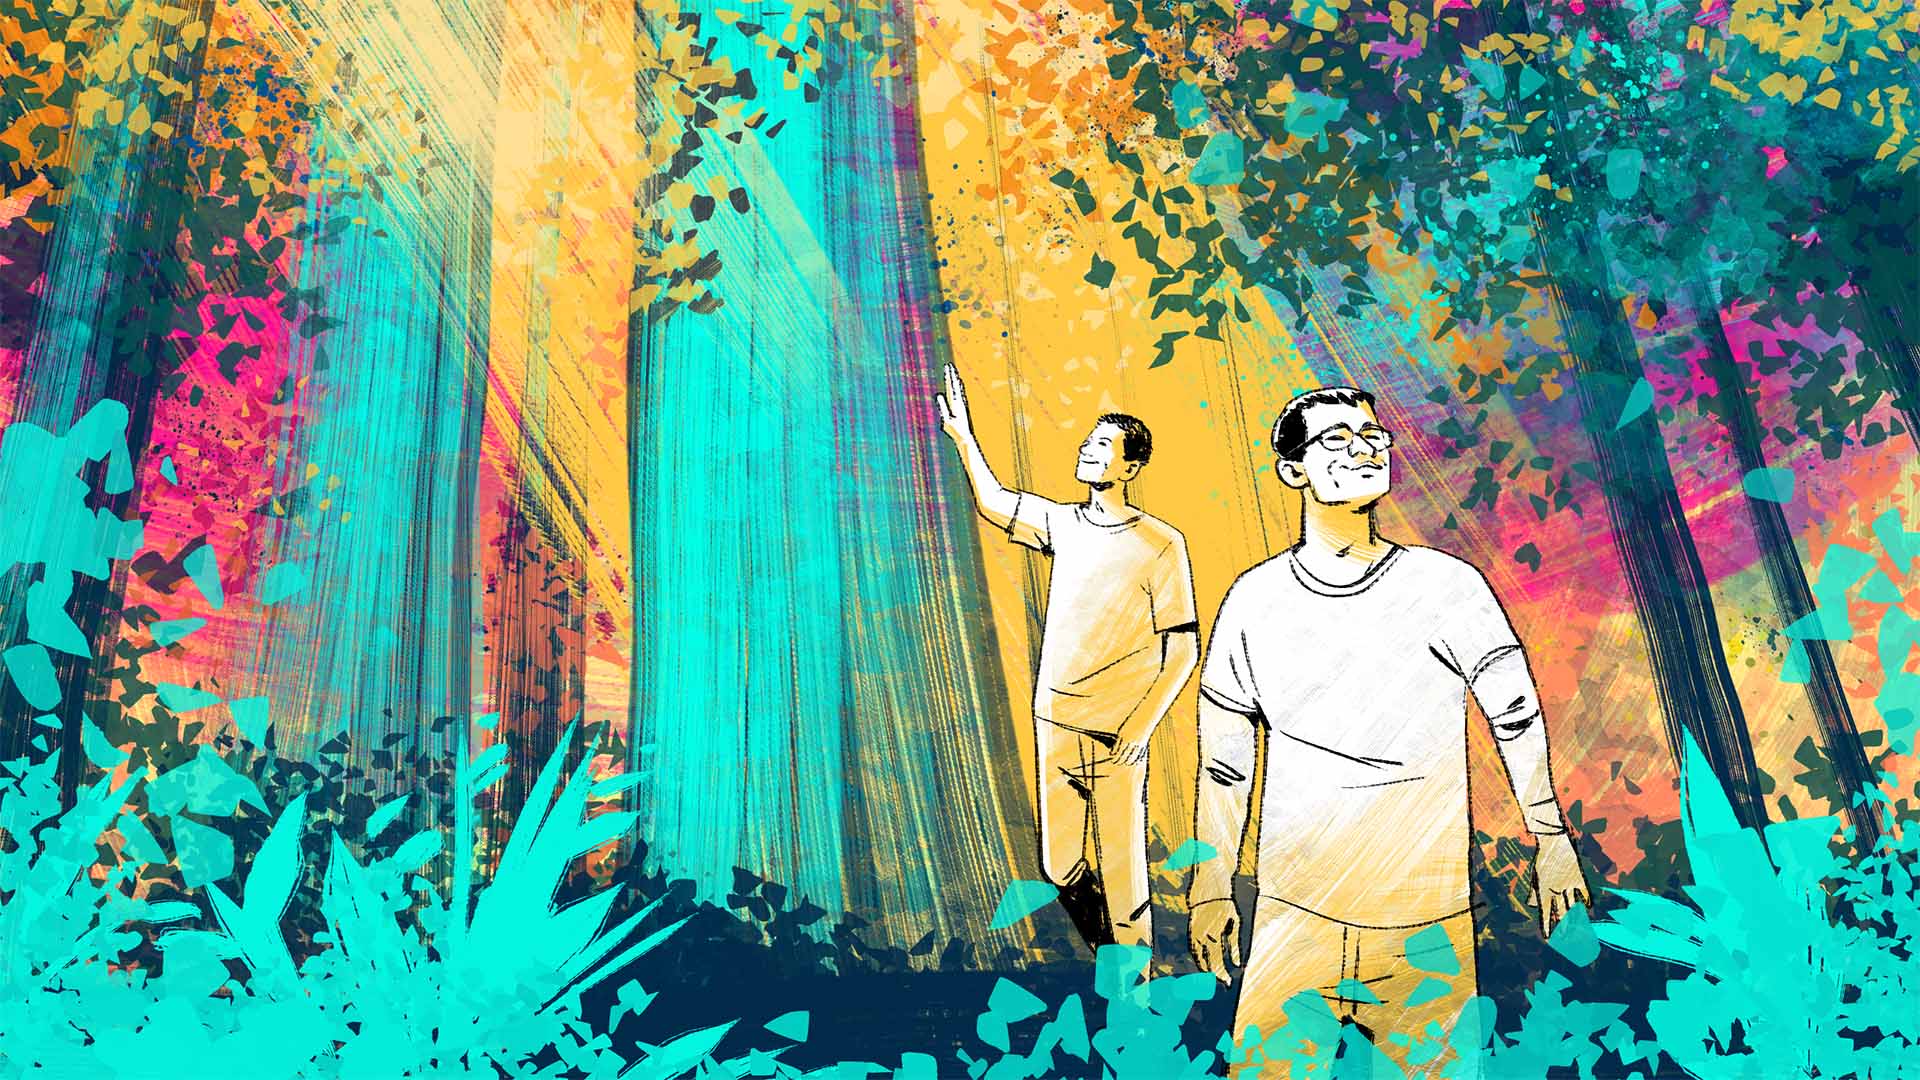 Illustration of two people in a colorful, verdant forest with the sun setting